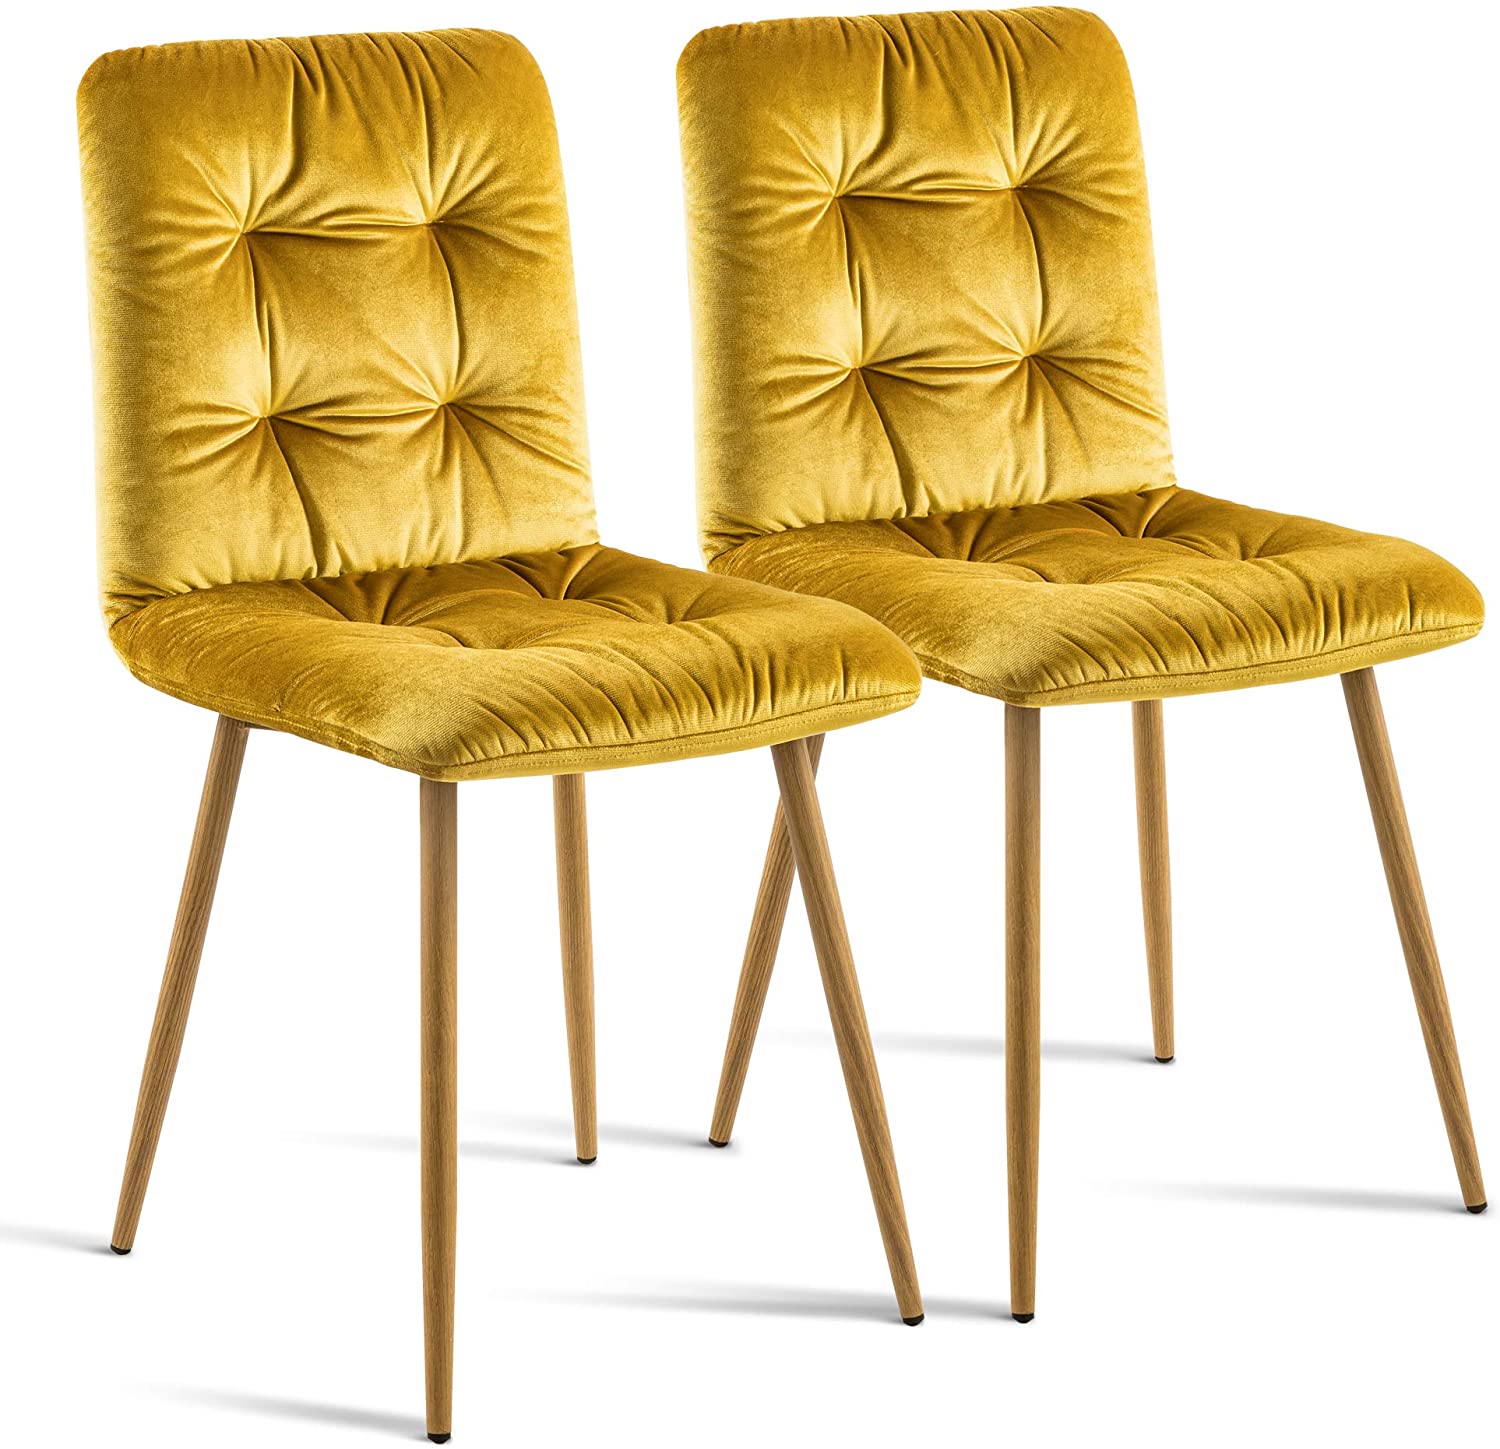 Modern Dining Chairs Kitchen & Dining Room Chairs Mid Century Velvet Accent Chair Living Room Chairs Armless Chairs Set of 2 6090-5981